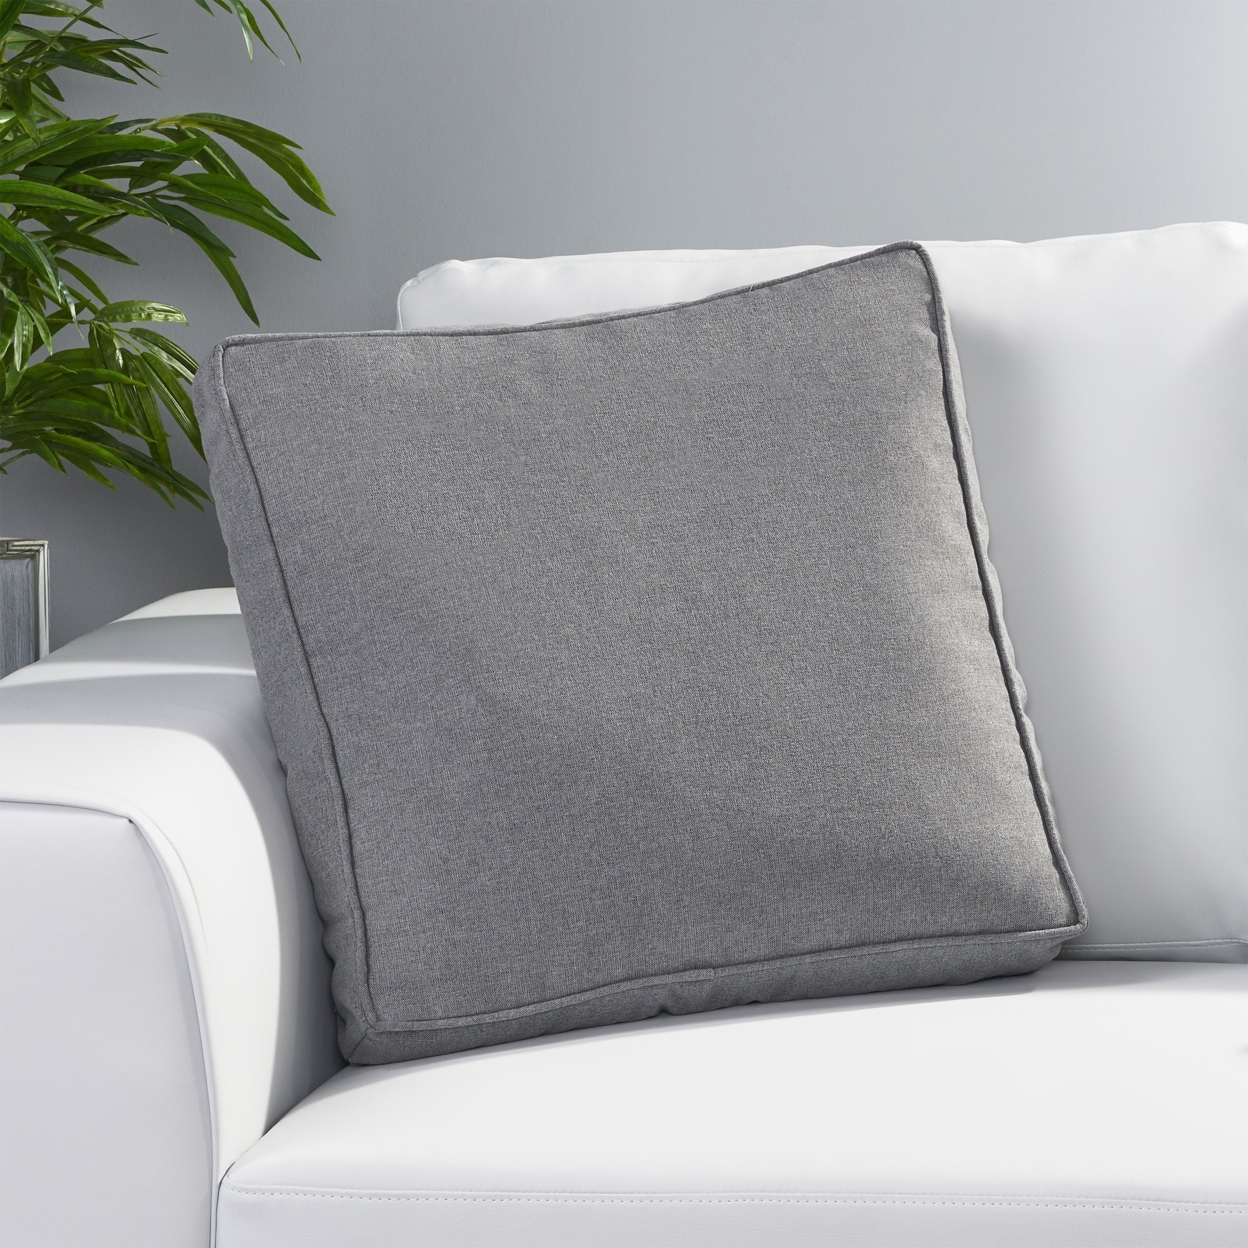 Kimani Square Water Resistant 18 Throw Pillow - Charcoal